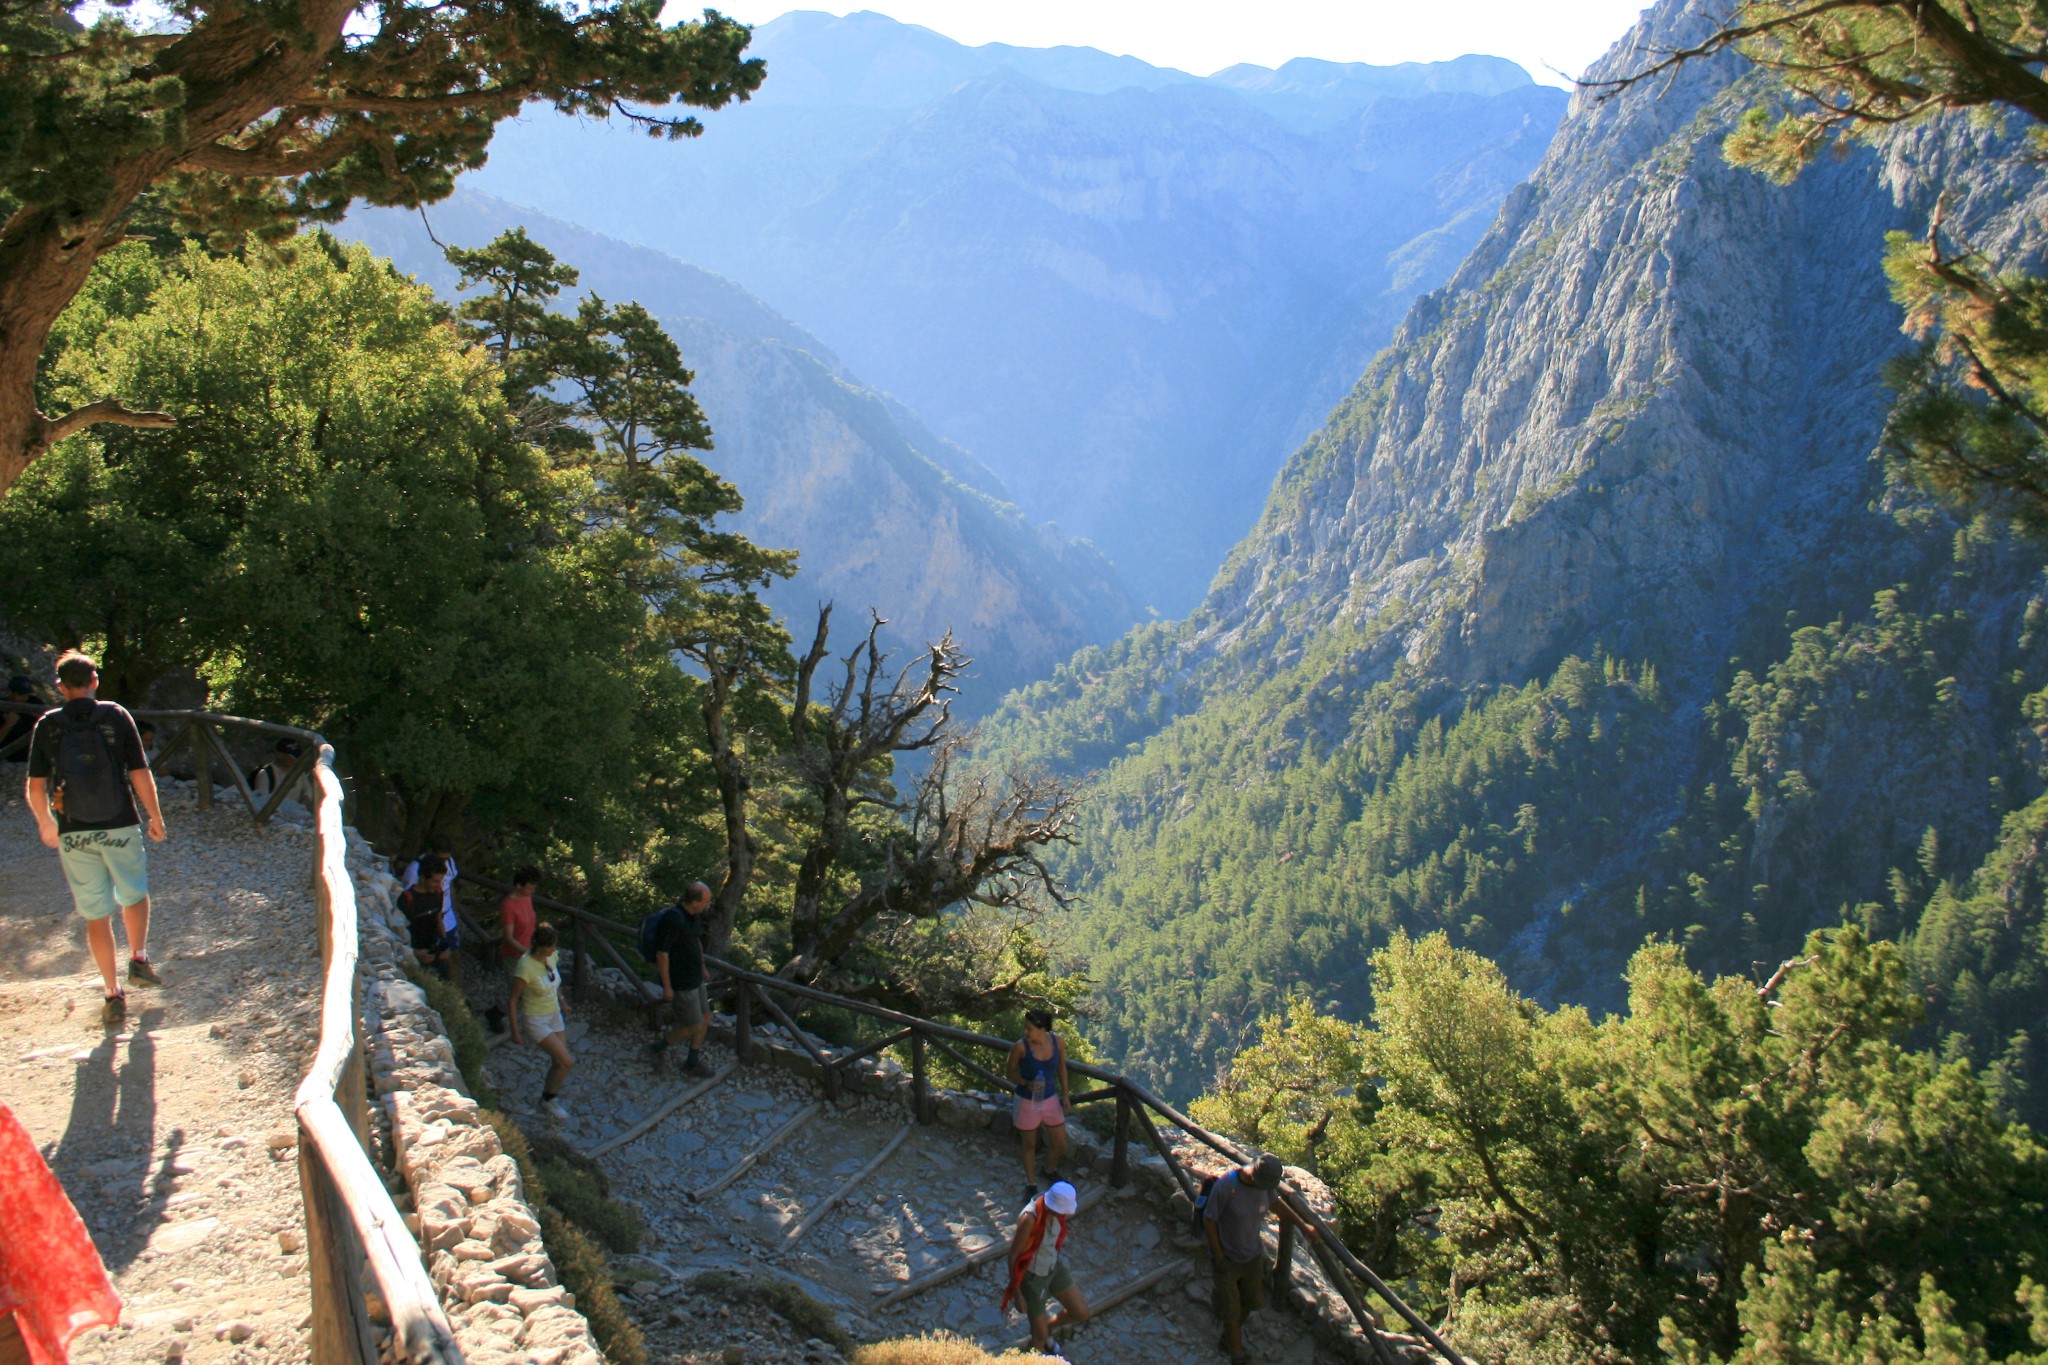 Initially we descend from Xyloskalo to the riverbed of Samaria Gorge